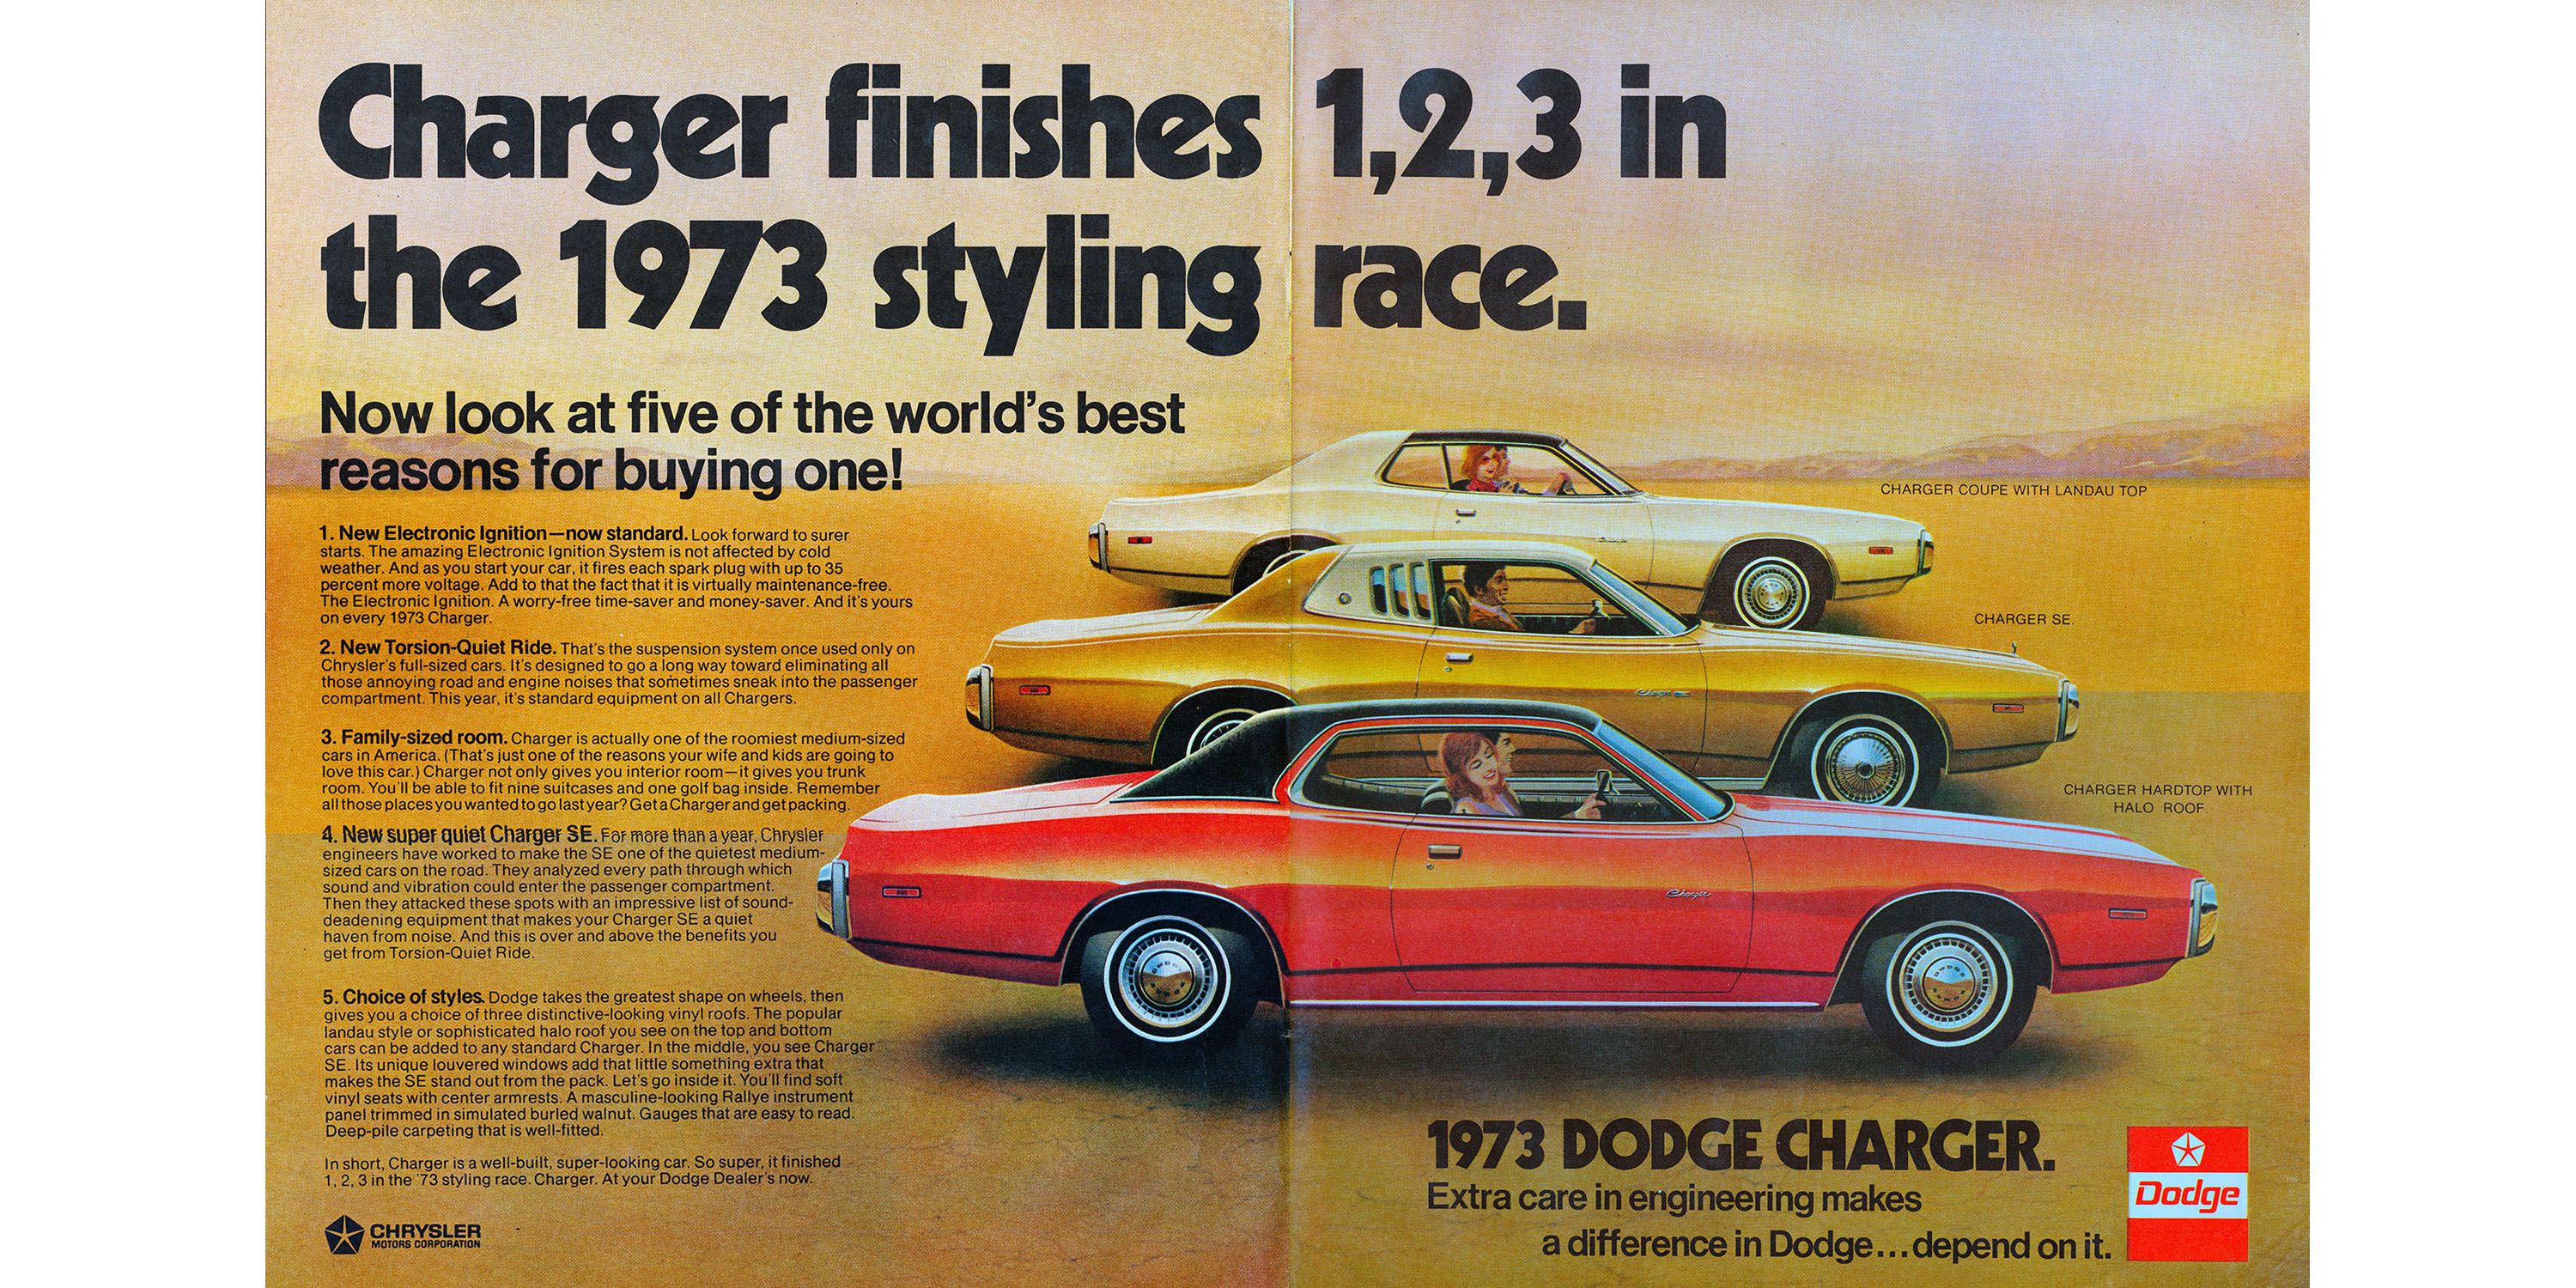 1973 Dodge Charger Finishes 1, 2, 3 in the Styling Race